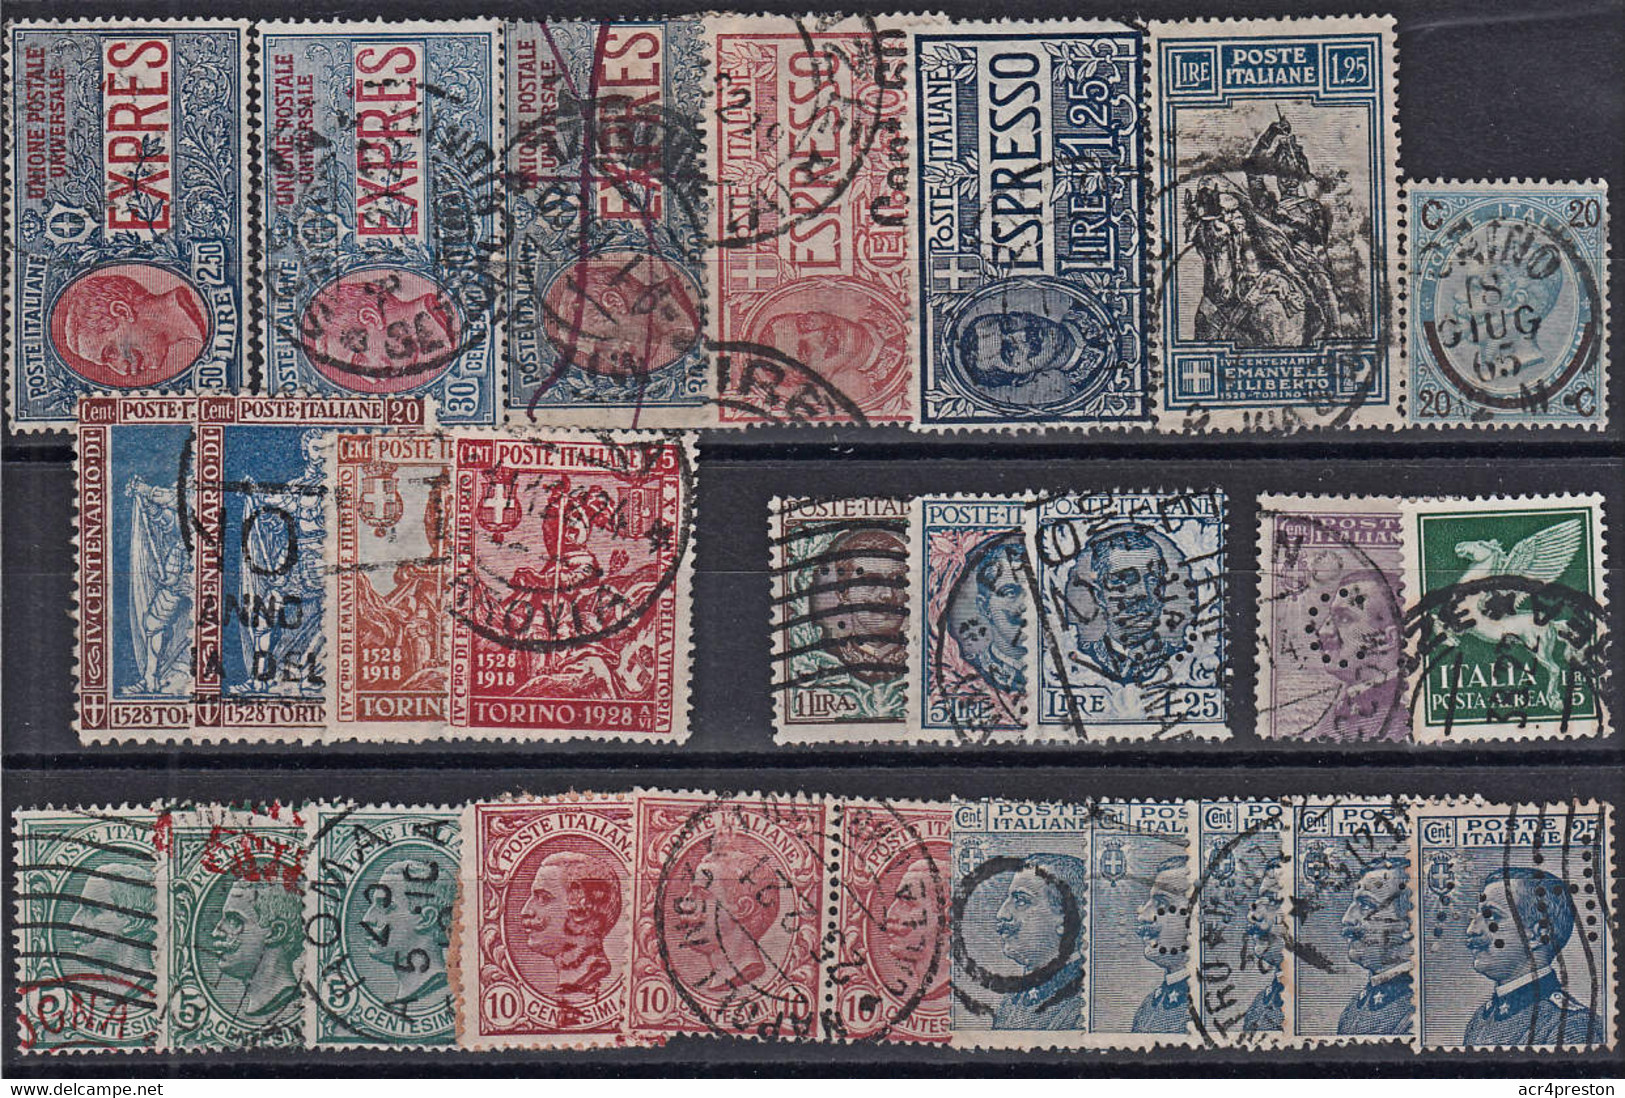 B0716 Small Lot Of Used Italy Stamps - Verzamelingen